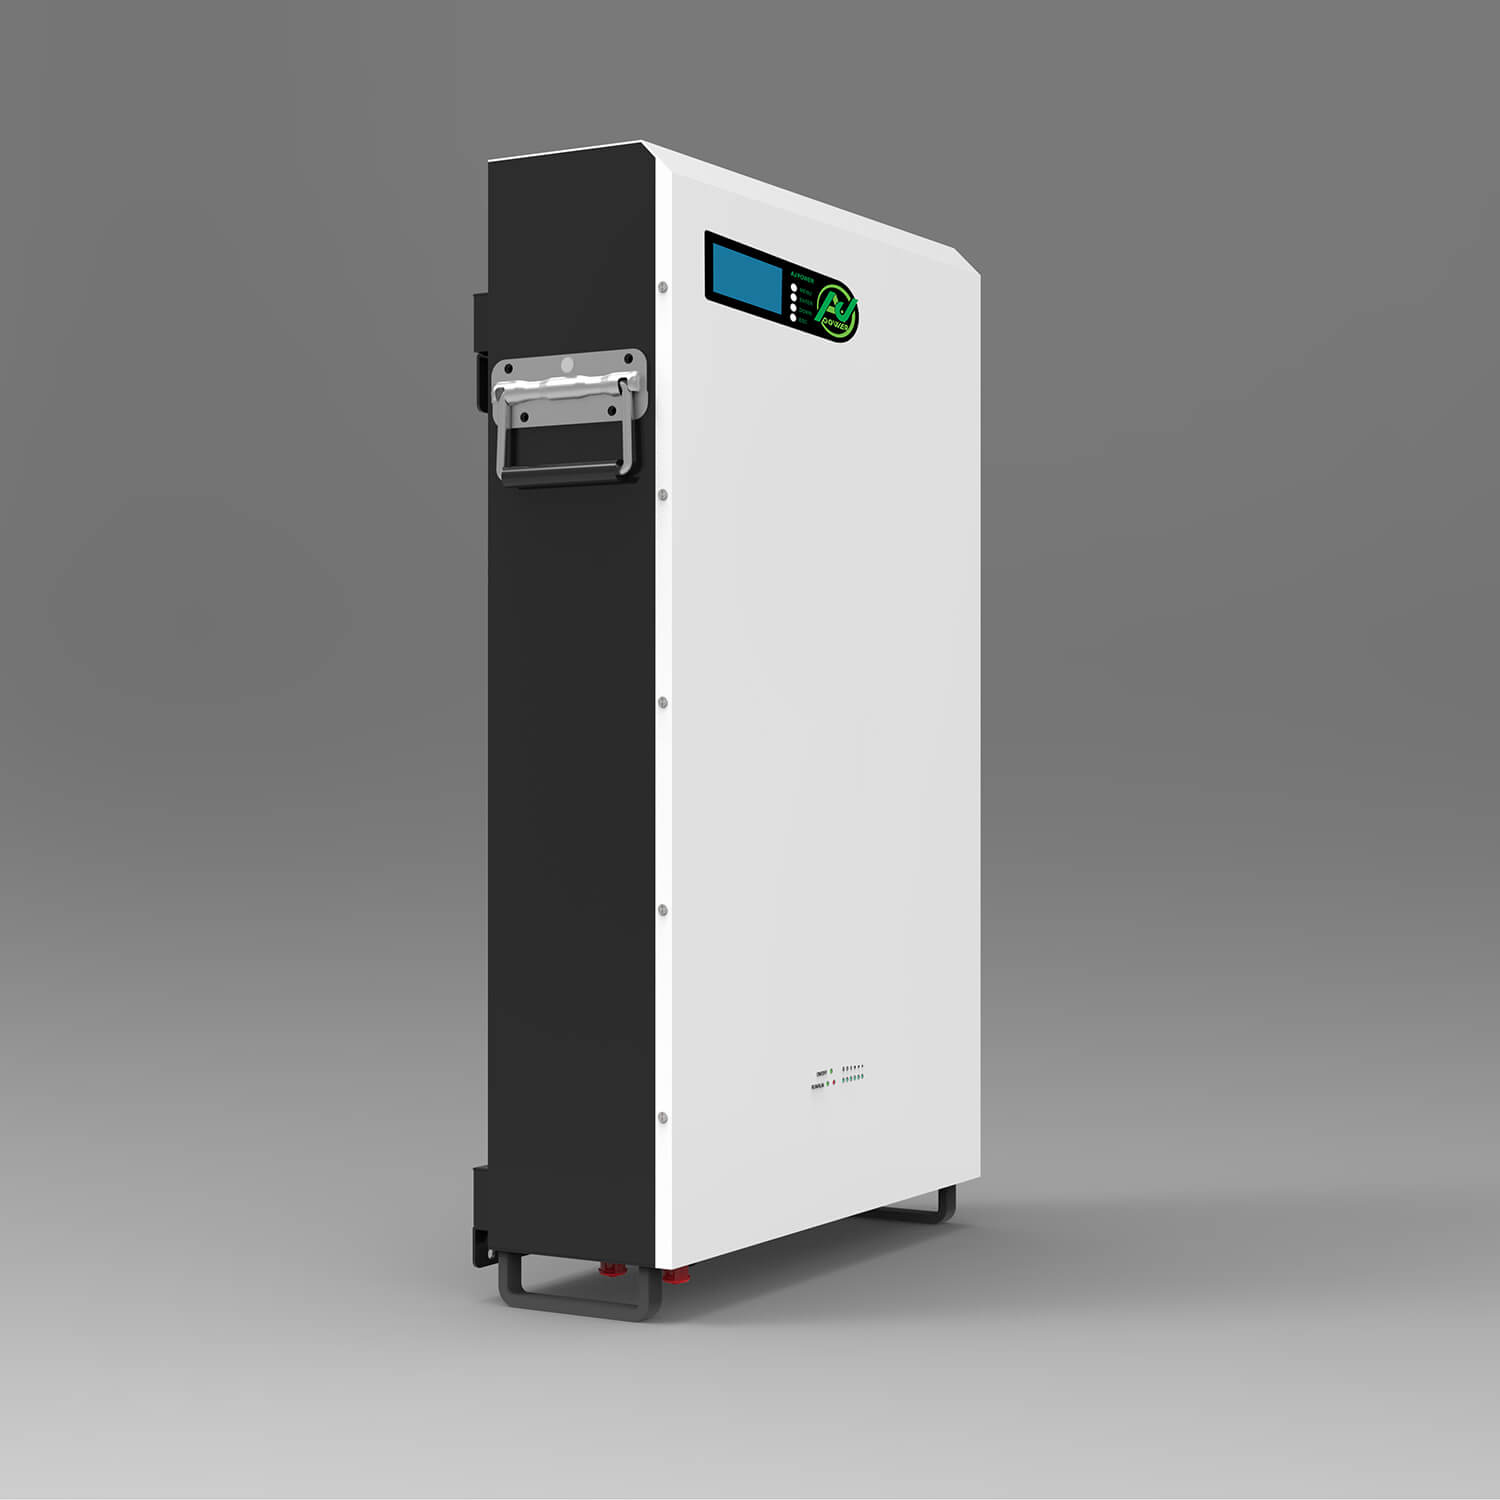 7kWh all-in-one energy storage solution